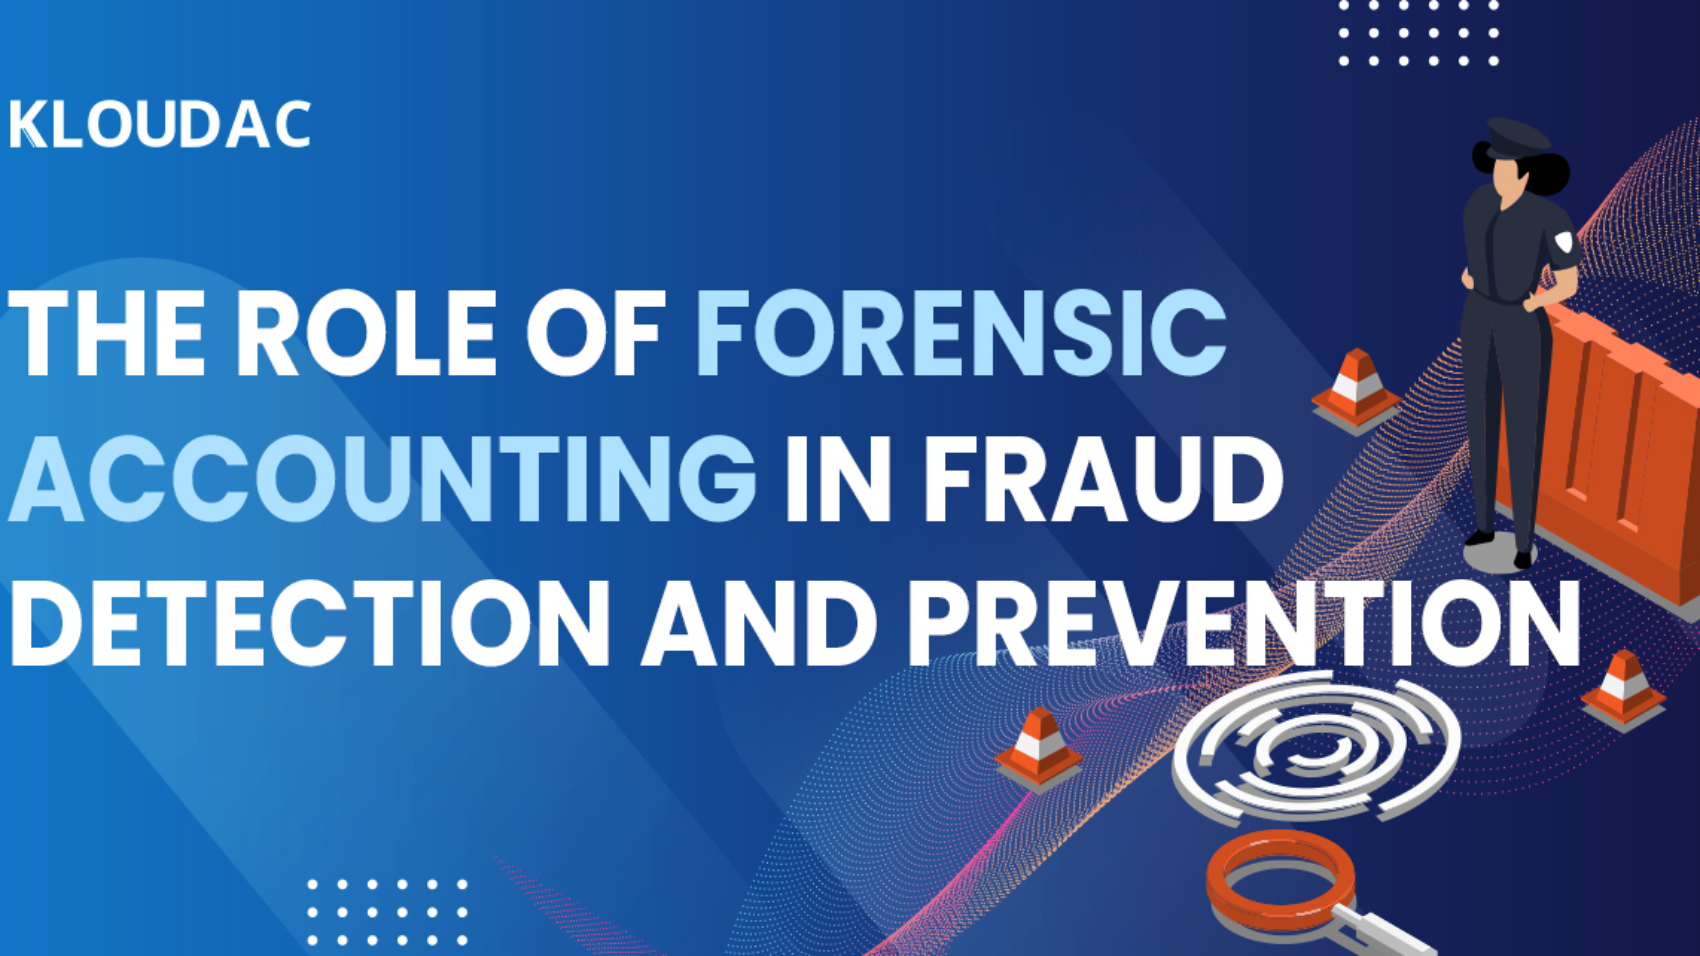 The Role of Forensic Accounting in Fraud Detection and Prevention